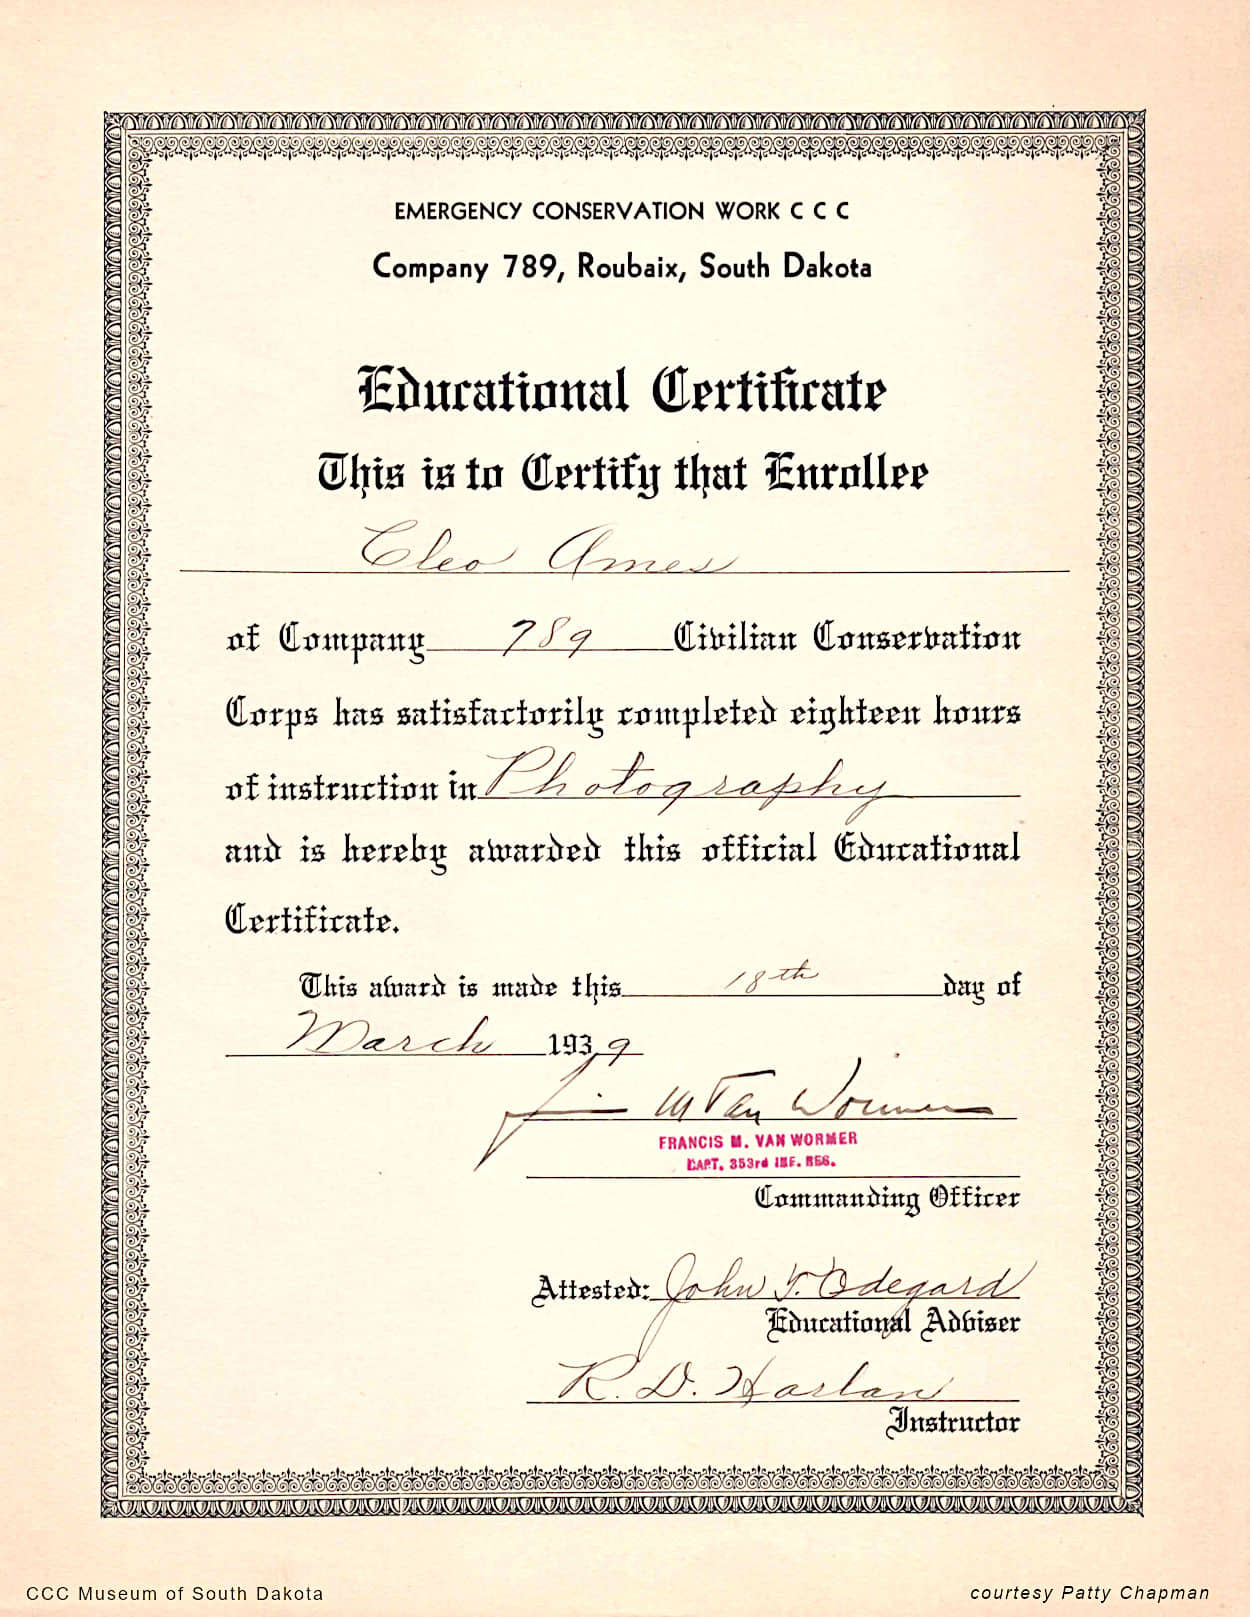 Cleo Ames Photography Certificate